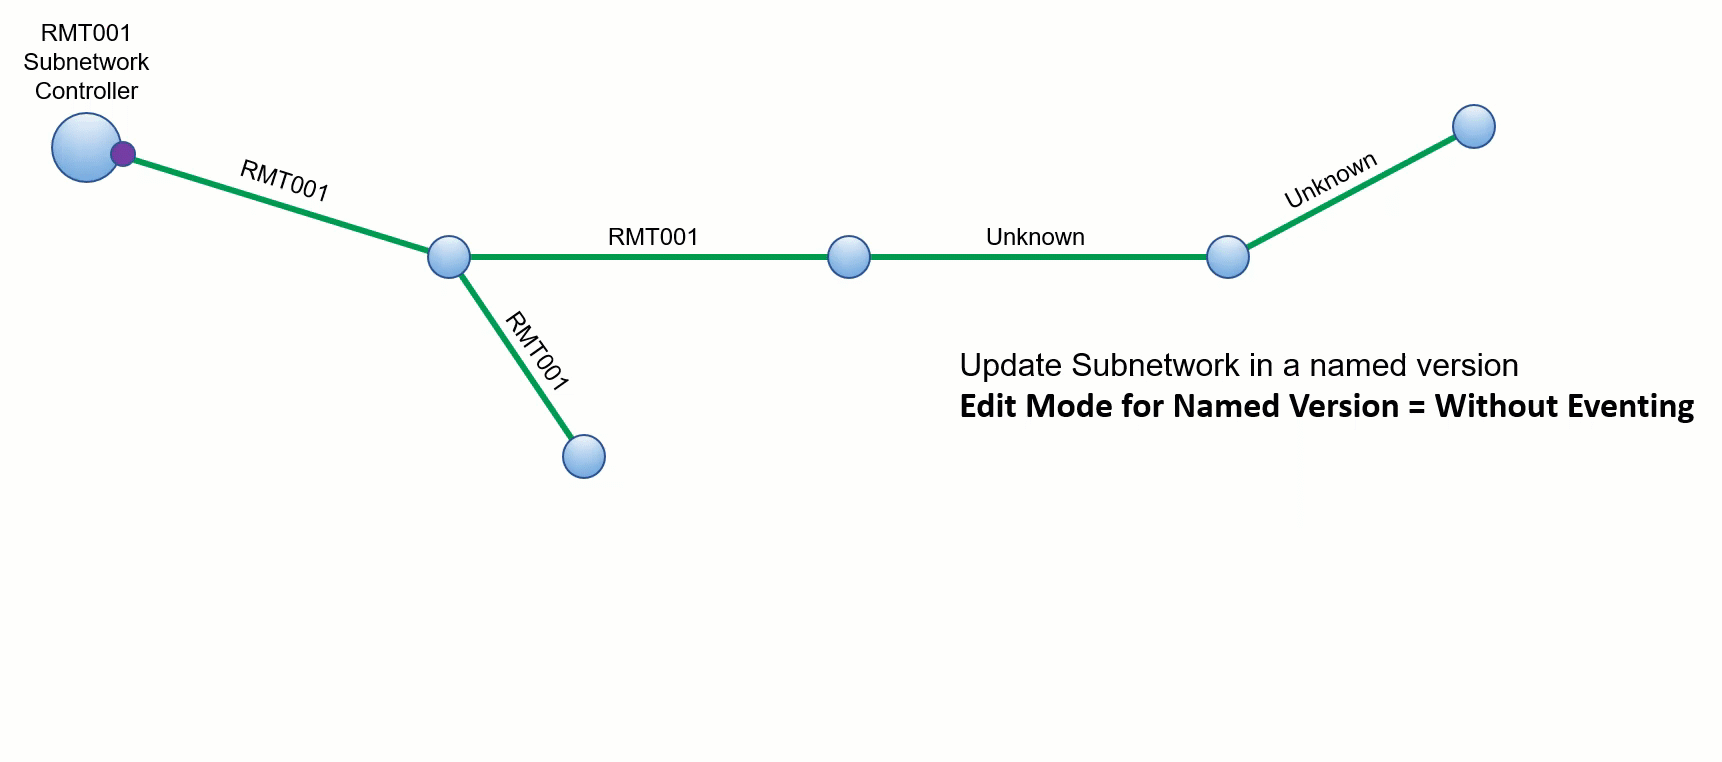 Update subnetwork operation run in a named version using the default option of Without Eventing for Edit Mode for Named Version.